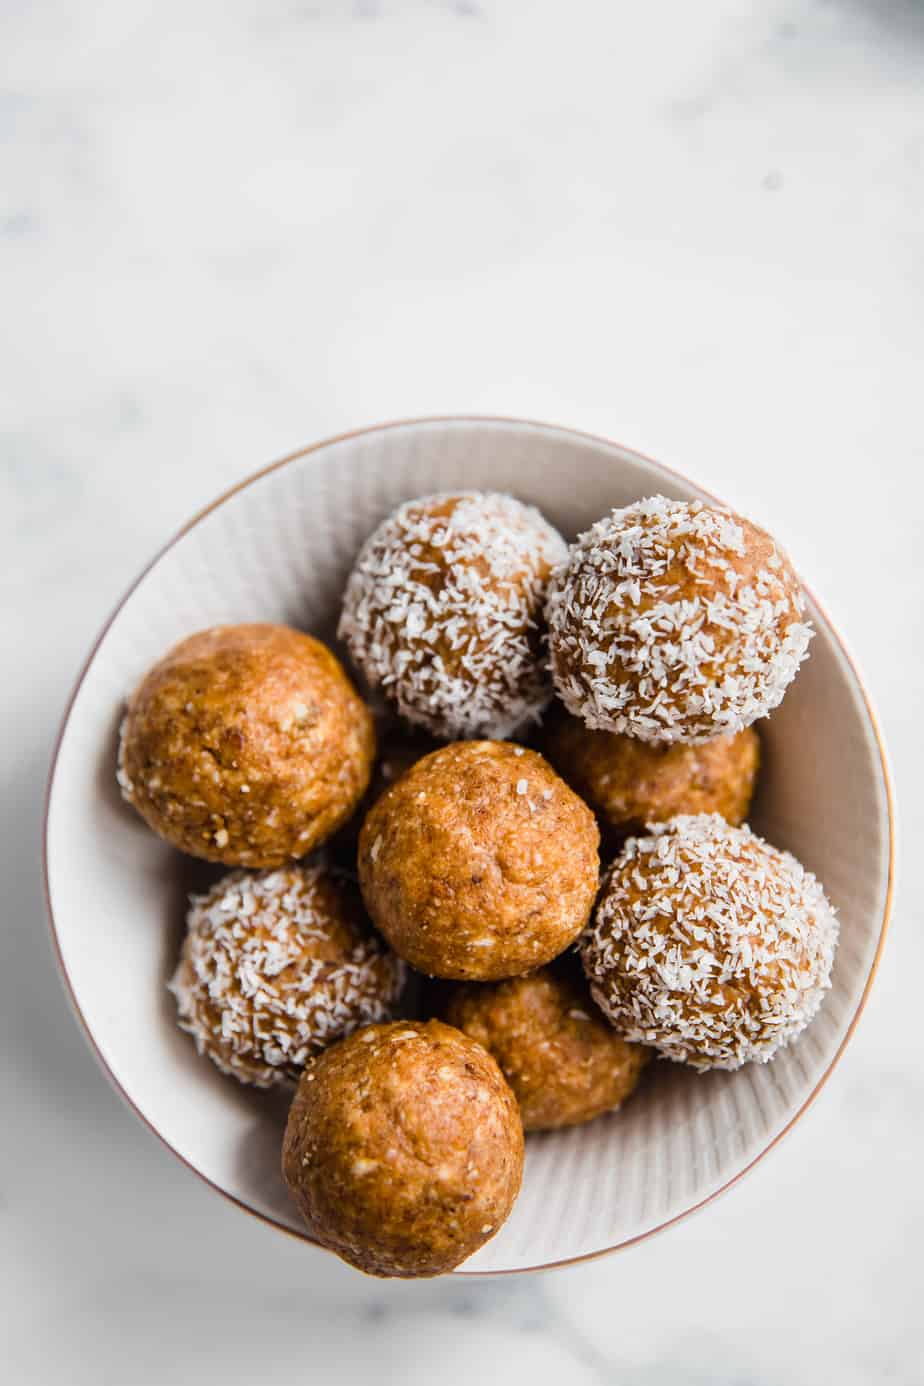 These lil Vegan Coconut Almond Bliss Balls are the wholesome, easy snacks you need to conquer busy days. They are packed with nutrients and beyond easy to make. So keep these healthy, bite-sized snacks around for when you need a delicious energy boost!